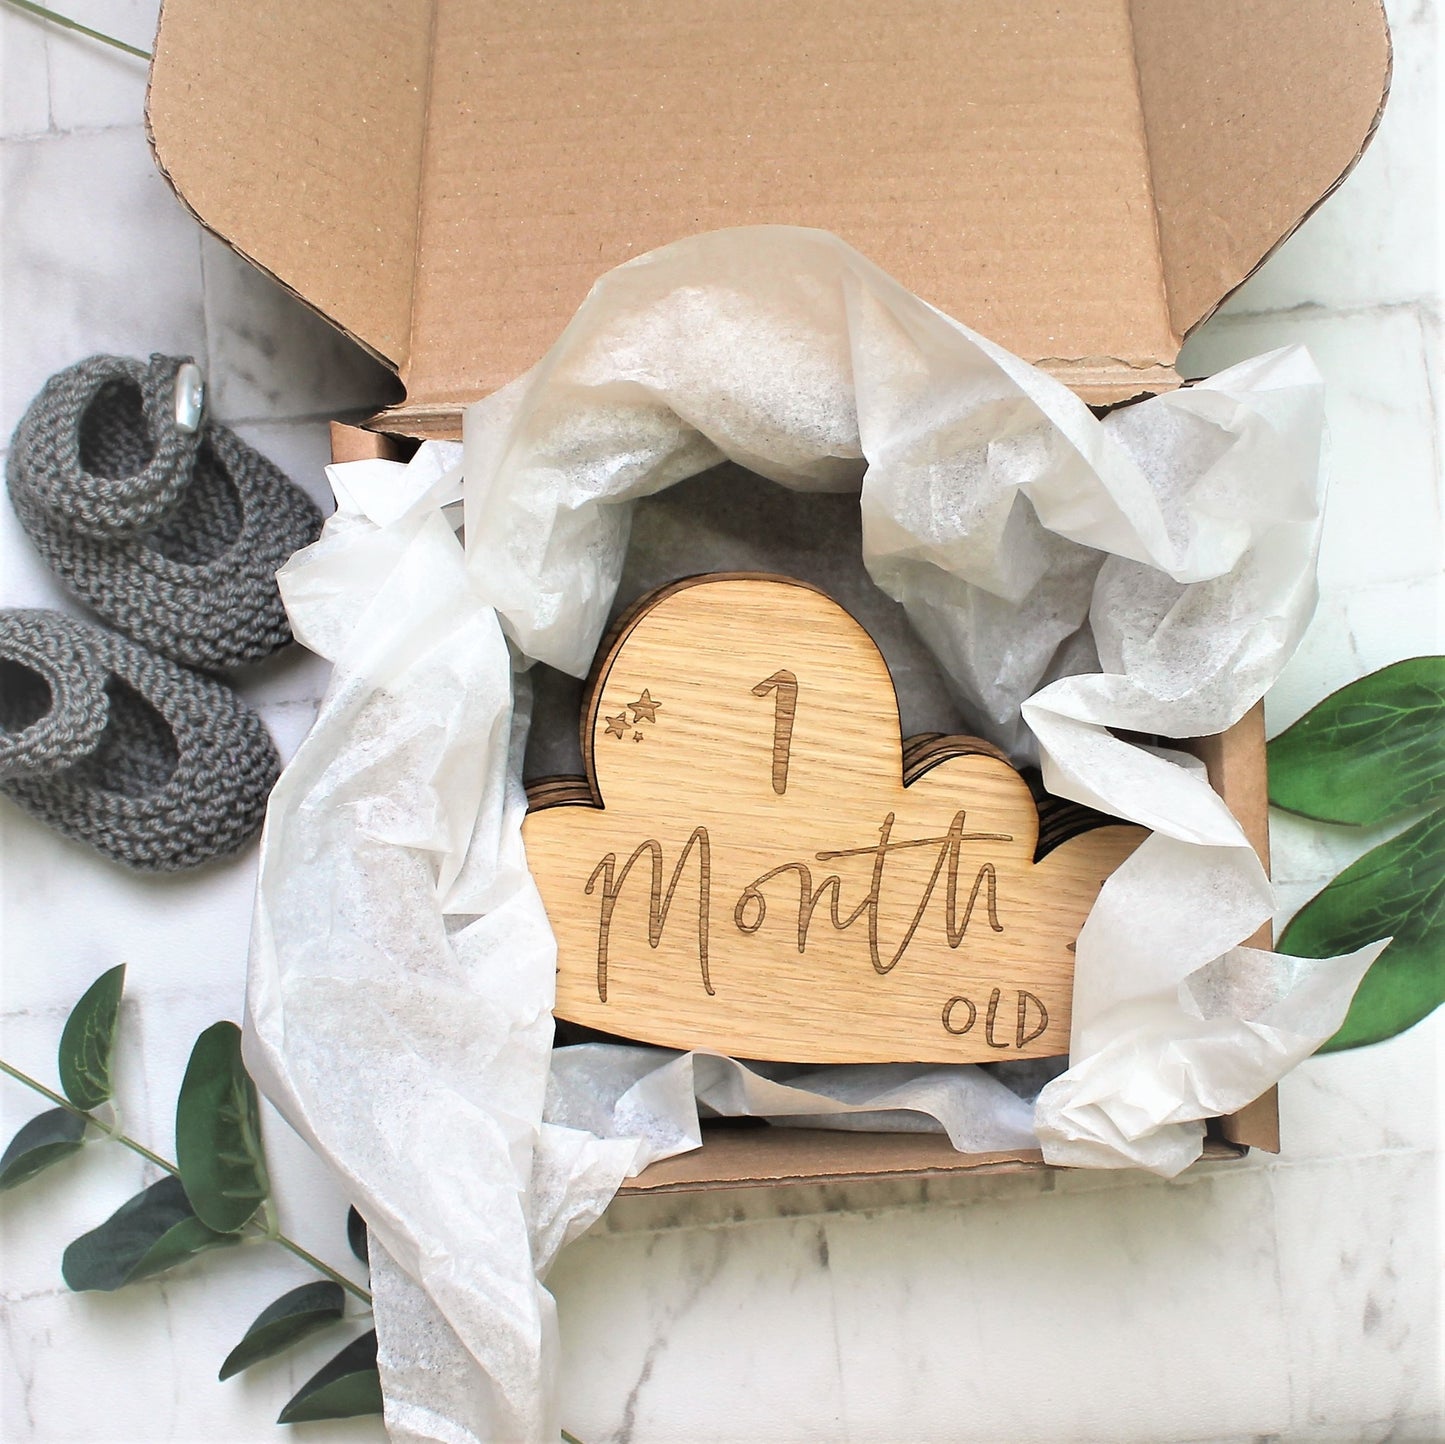 Packaged up baby milestone gift, in brown paper box and white tissue paper